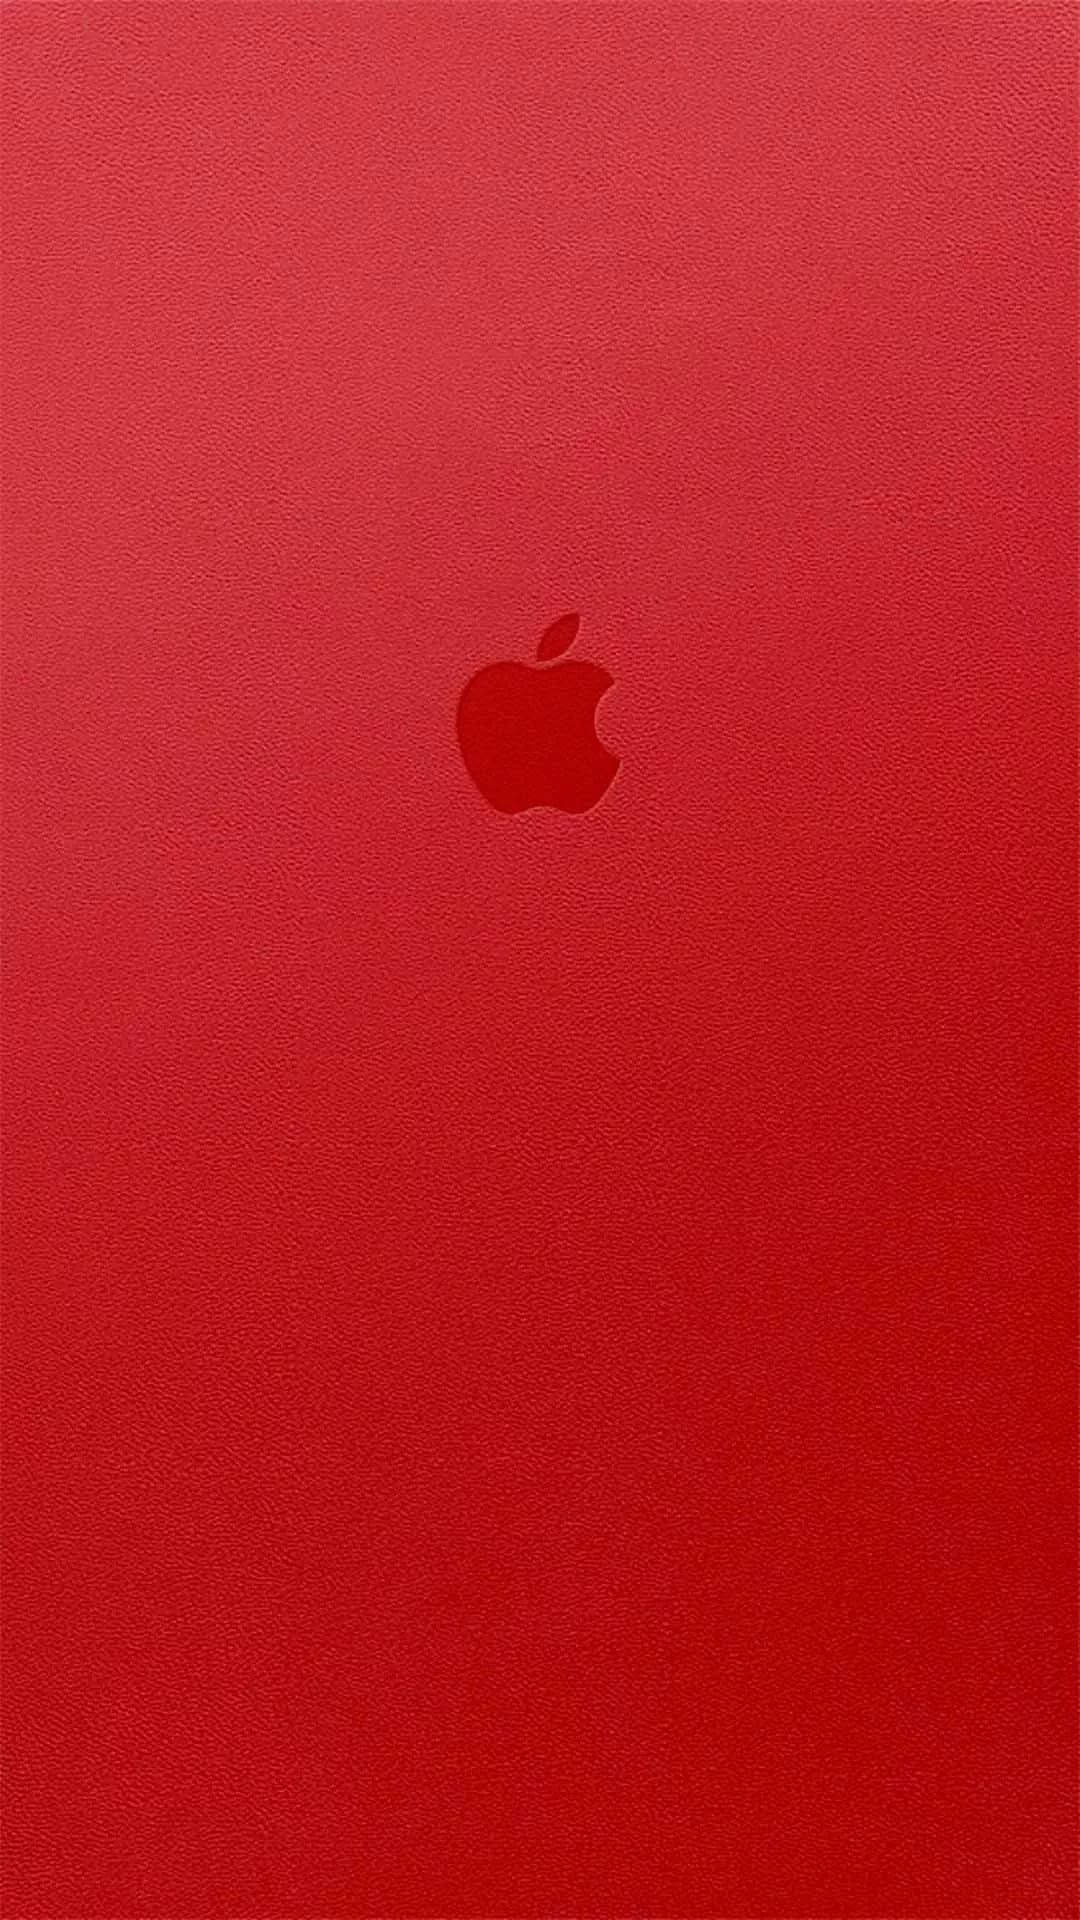 Download Pure Red Apple Logo Wallpaper 